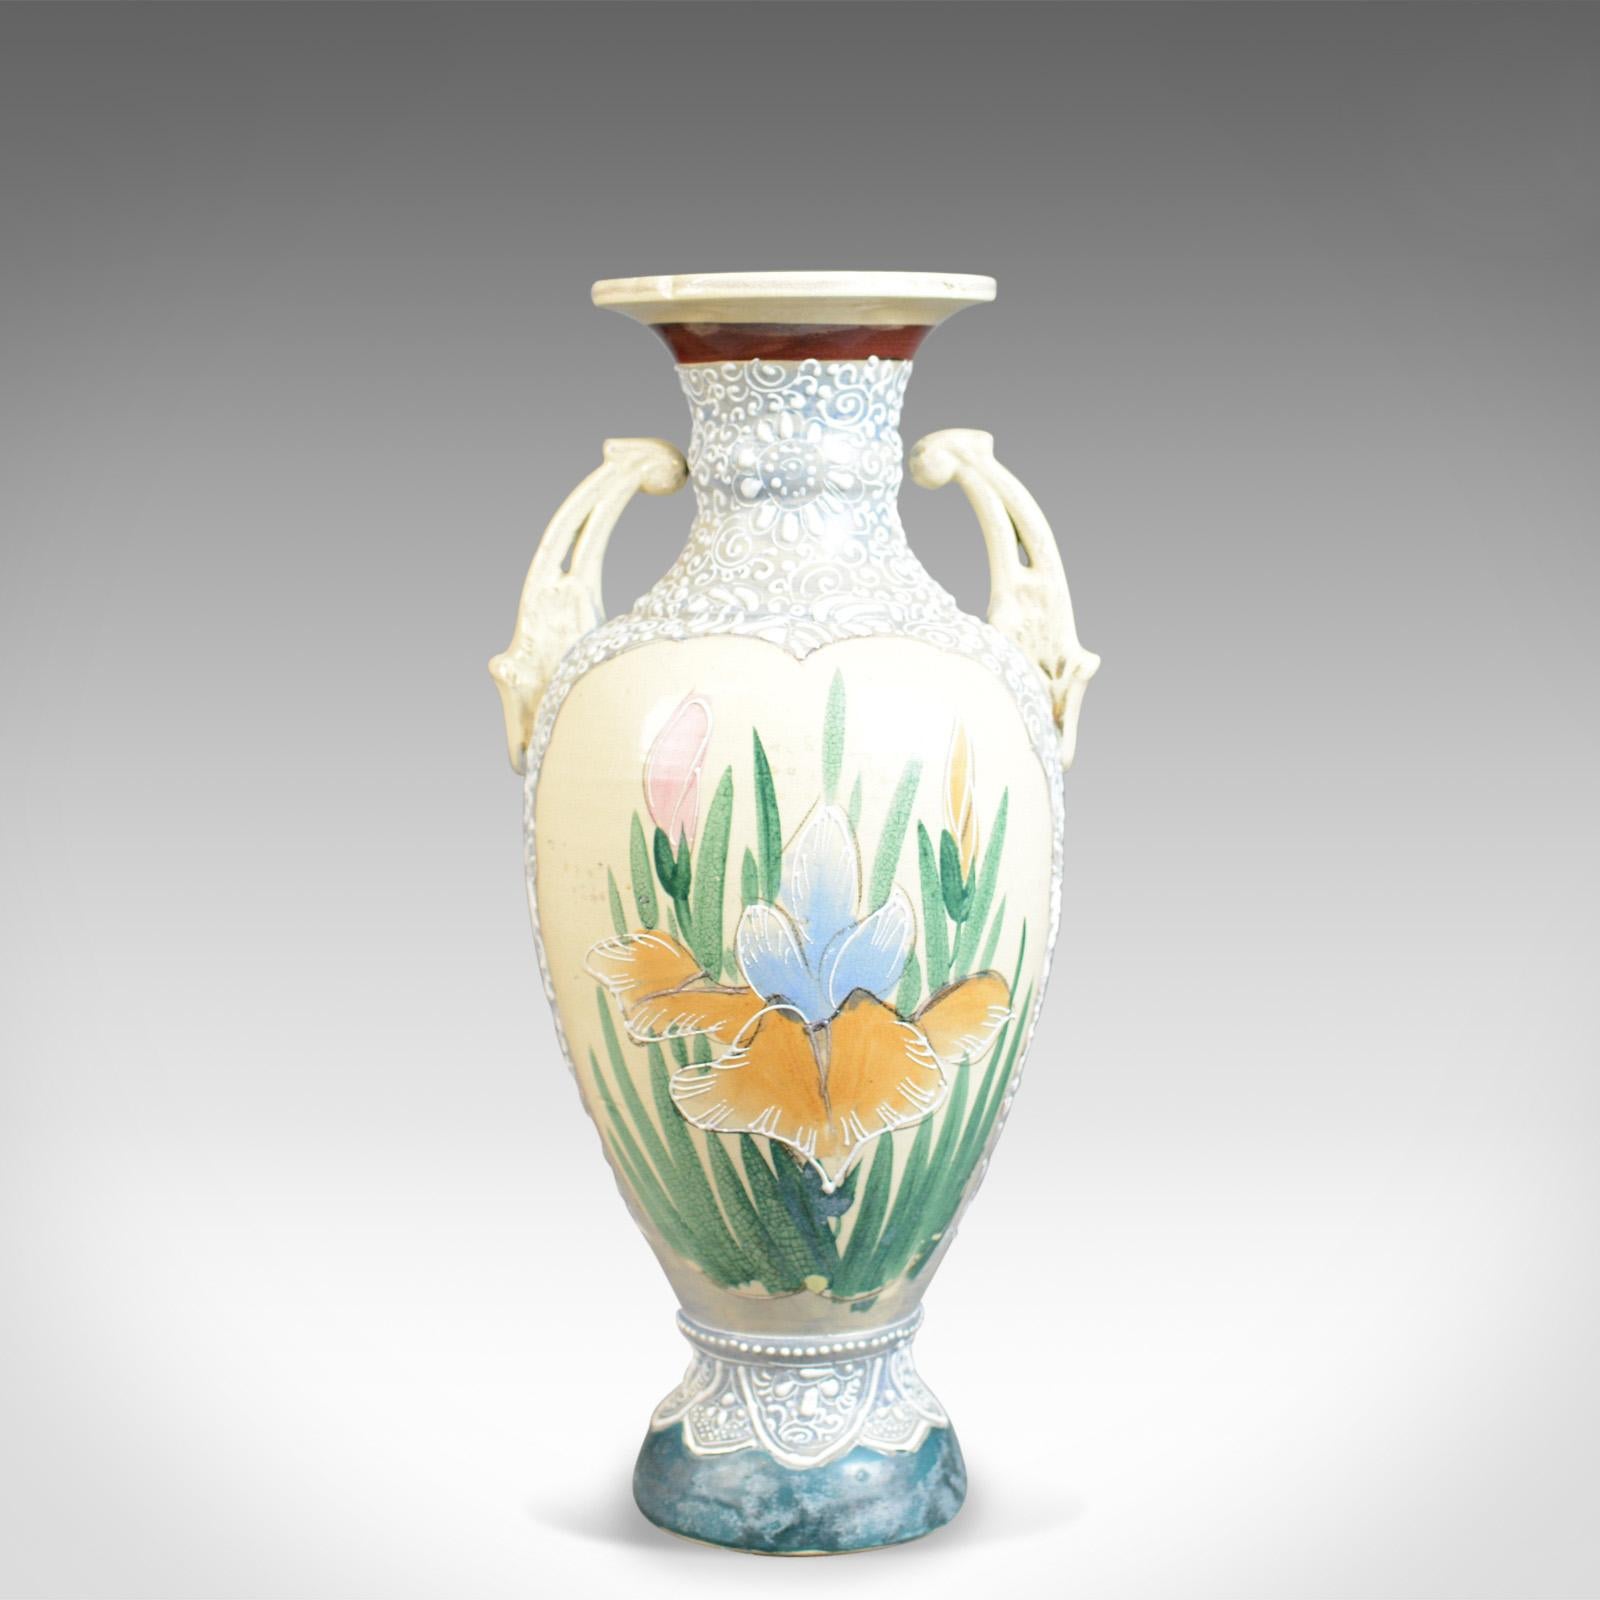 This is a large vintage Japanese baluster vase, a highly decorated oriental ceramic urn dating to the mid-late 20th century.

Of Classic form and in good proportion
Of quality craftsmanship, free from damage
Maker's Mark to the base which